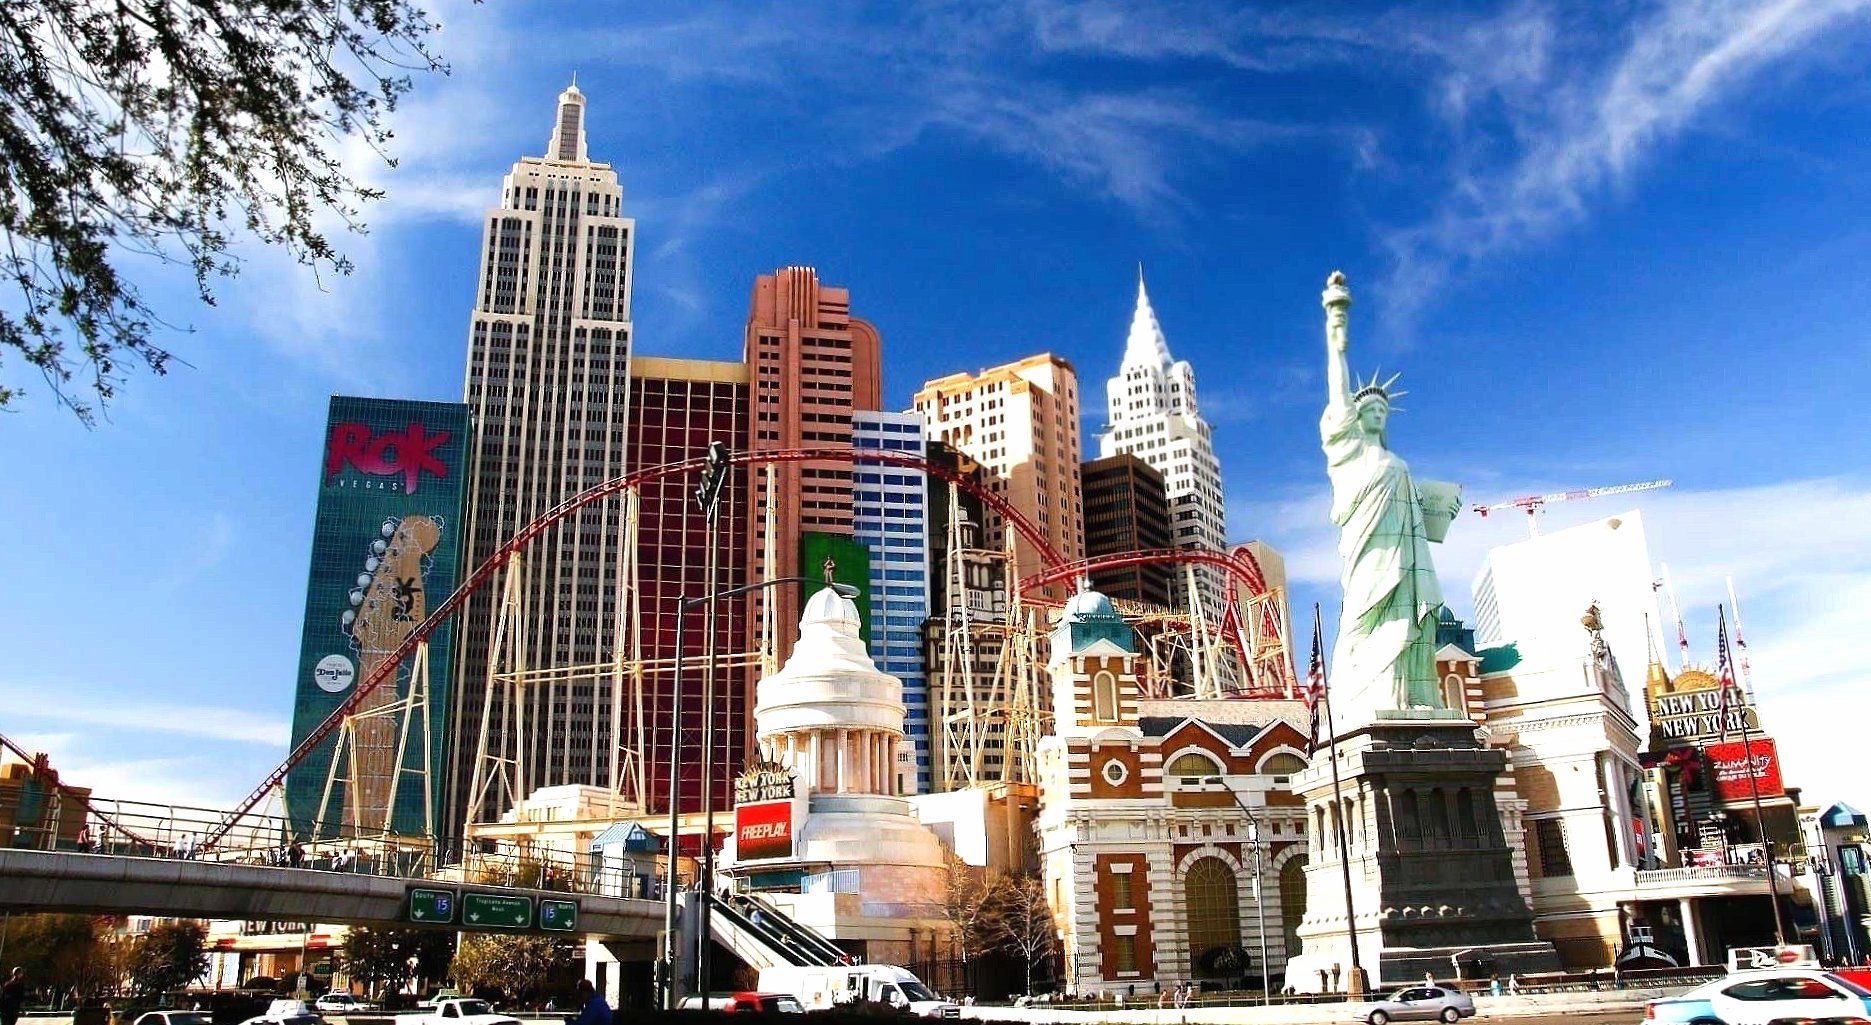 Las vegas staute of liberty wallpapers HD quality